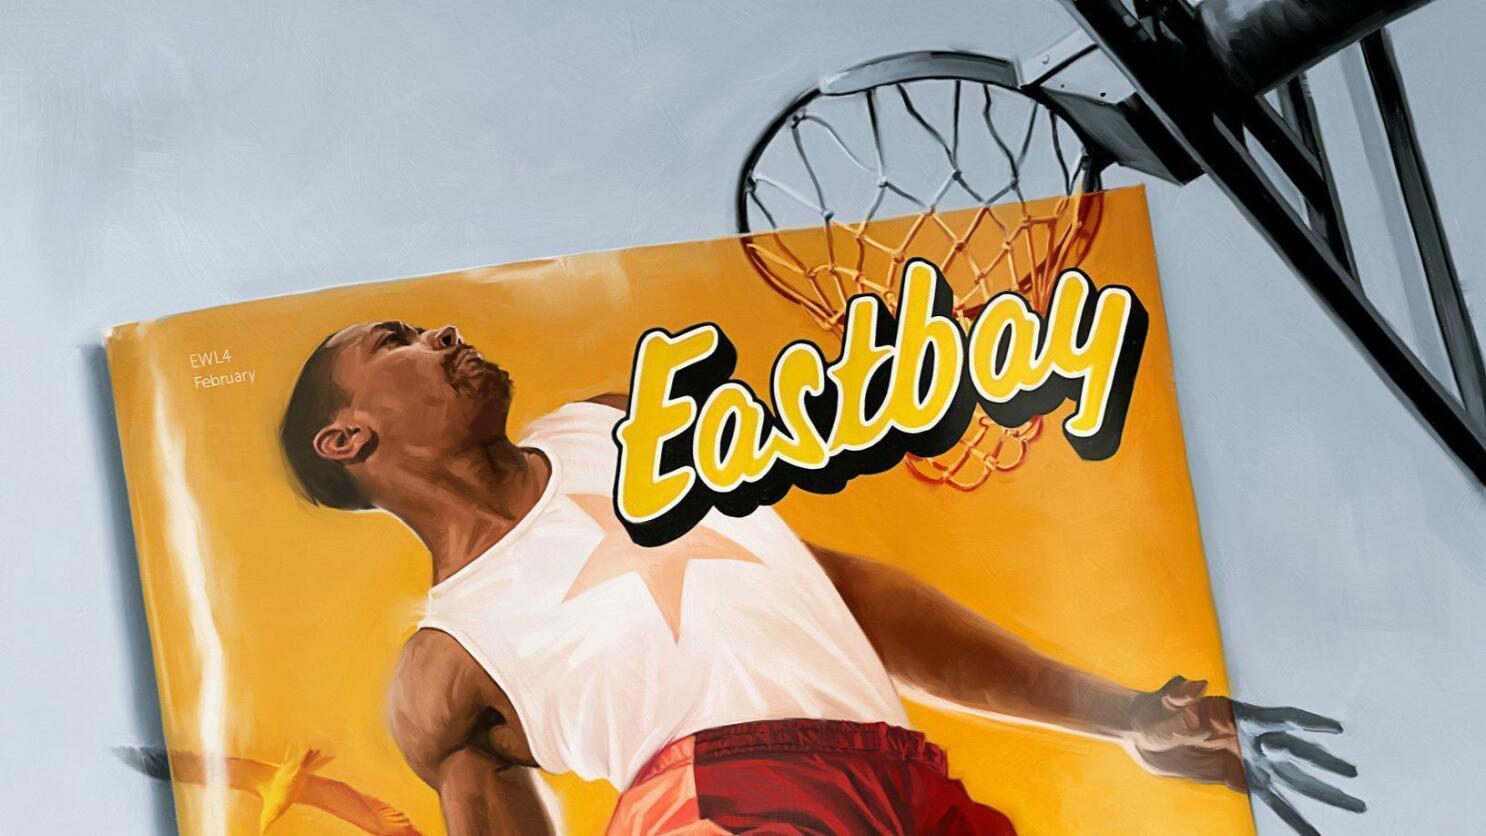 Sneakerheads Mourn Eastbay, Whose Catalog Was the Bible of